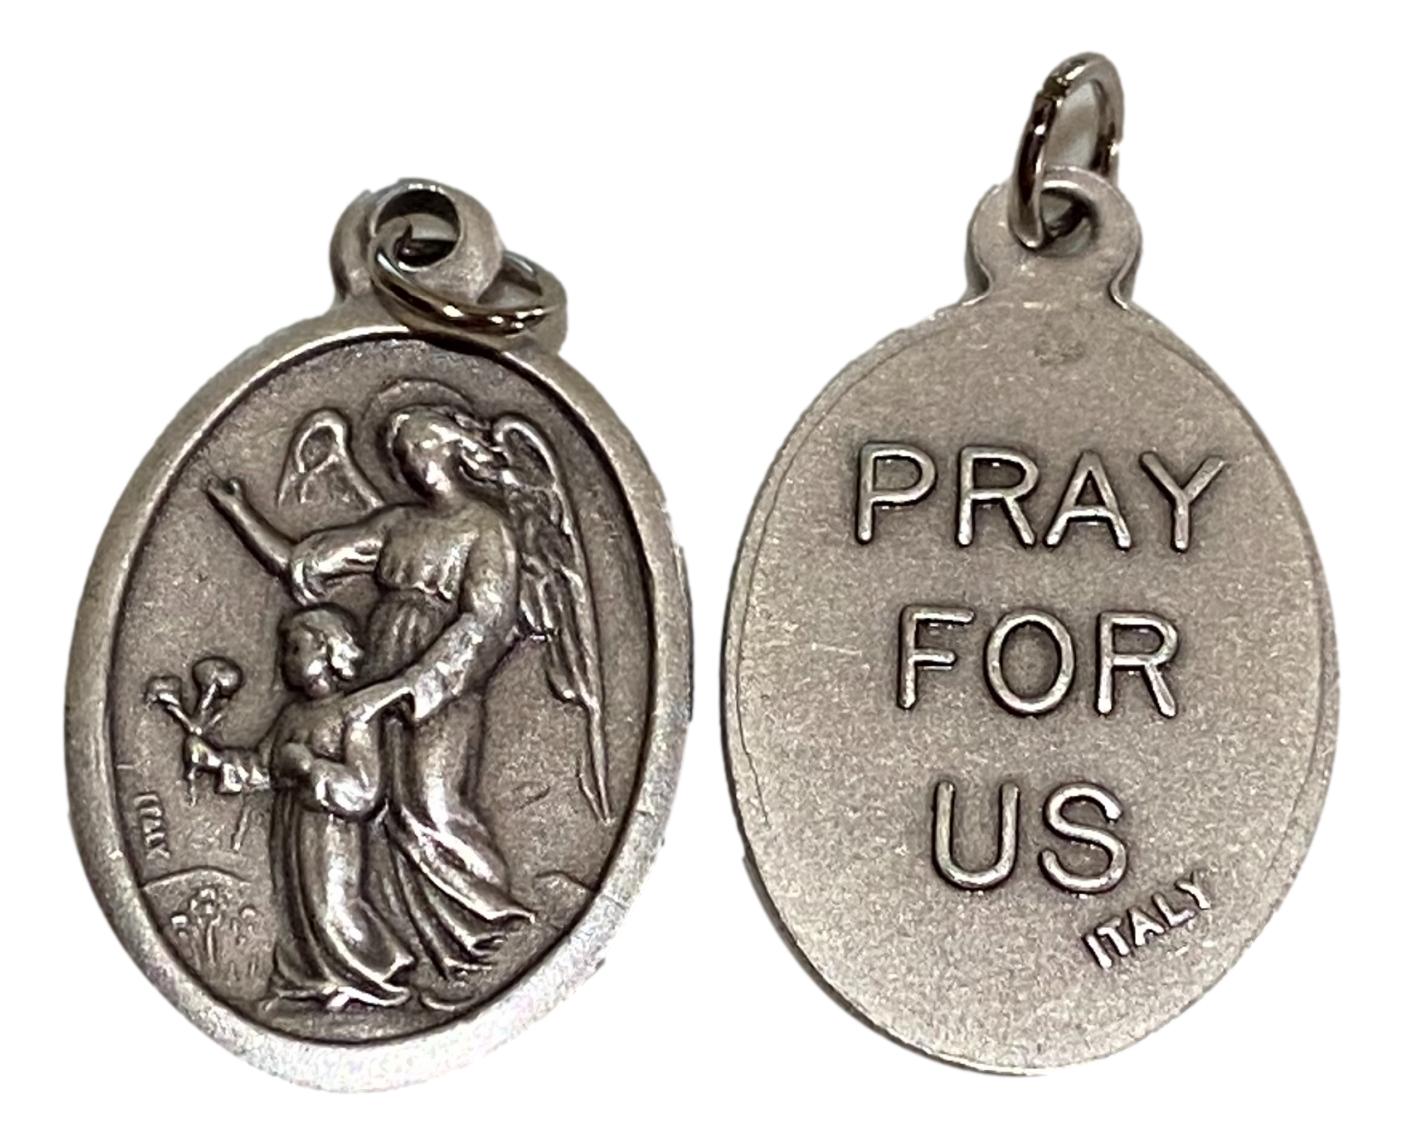 Medal Guardian Angel Pray For Us Italian Double-Sided Silver Oxidized Metal Alloy 1 inch - Ysleta Mission Gift Shop- VOTED El Paso's Best Gift Shop